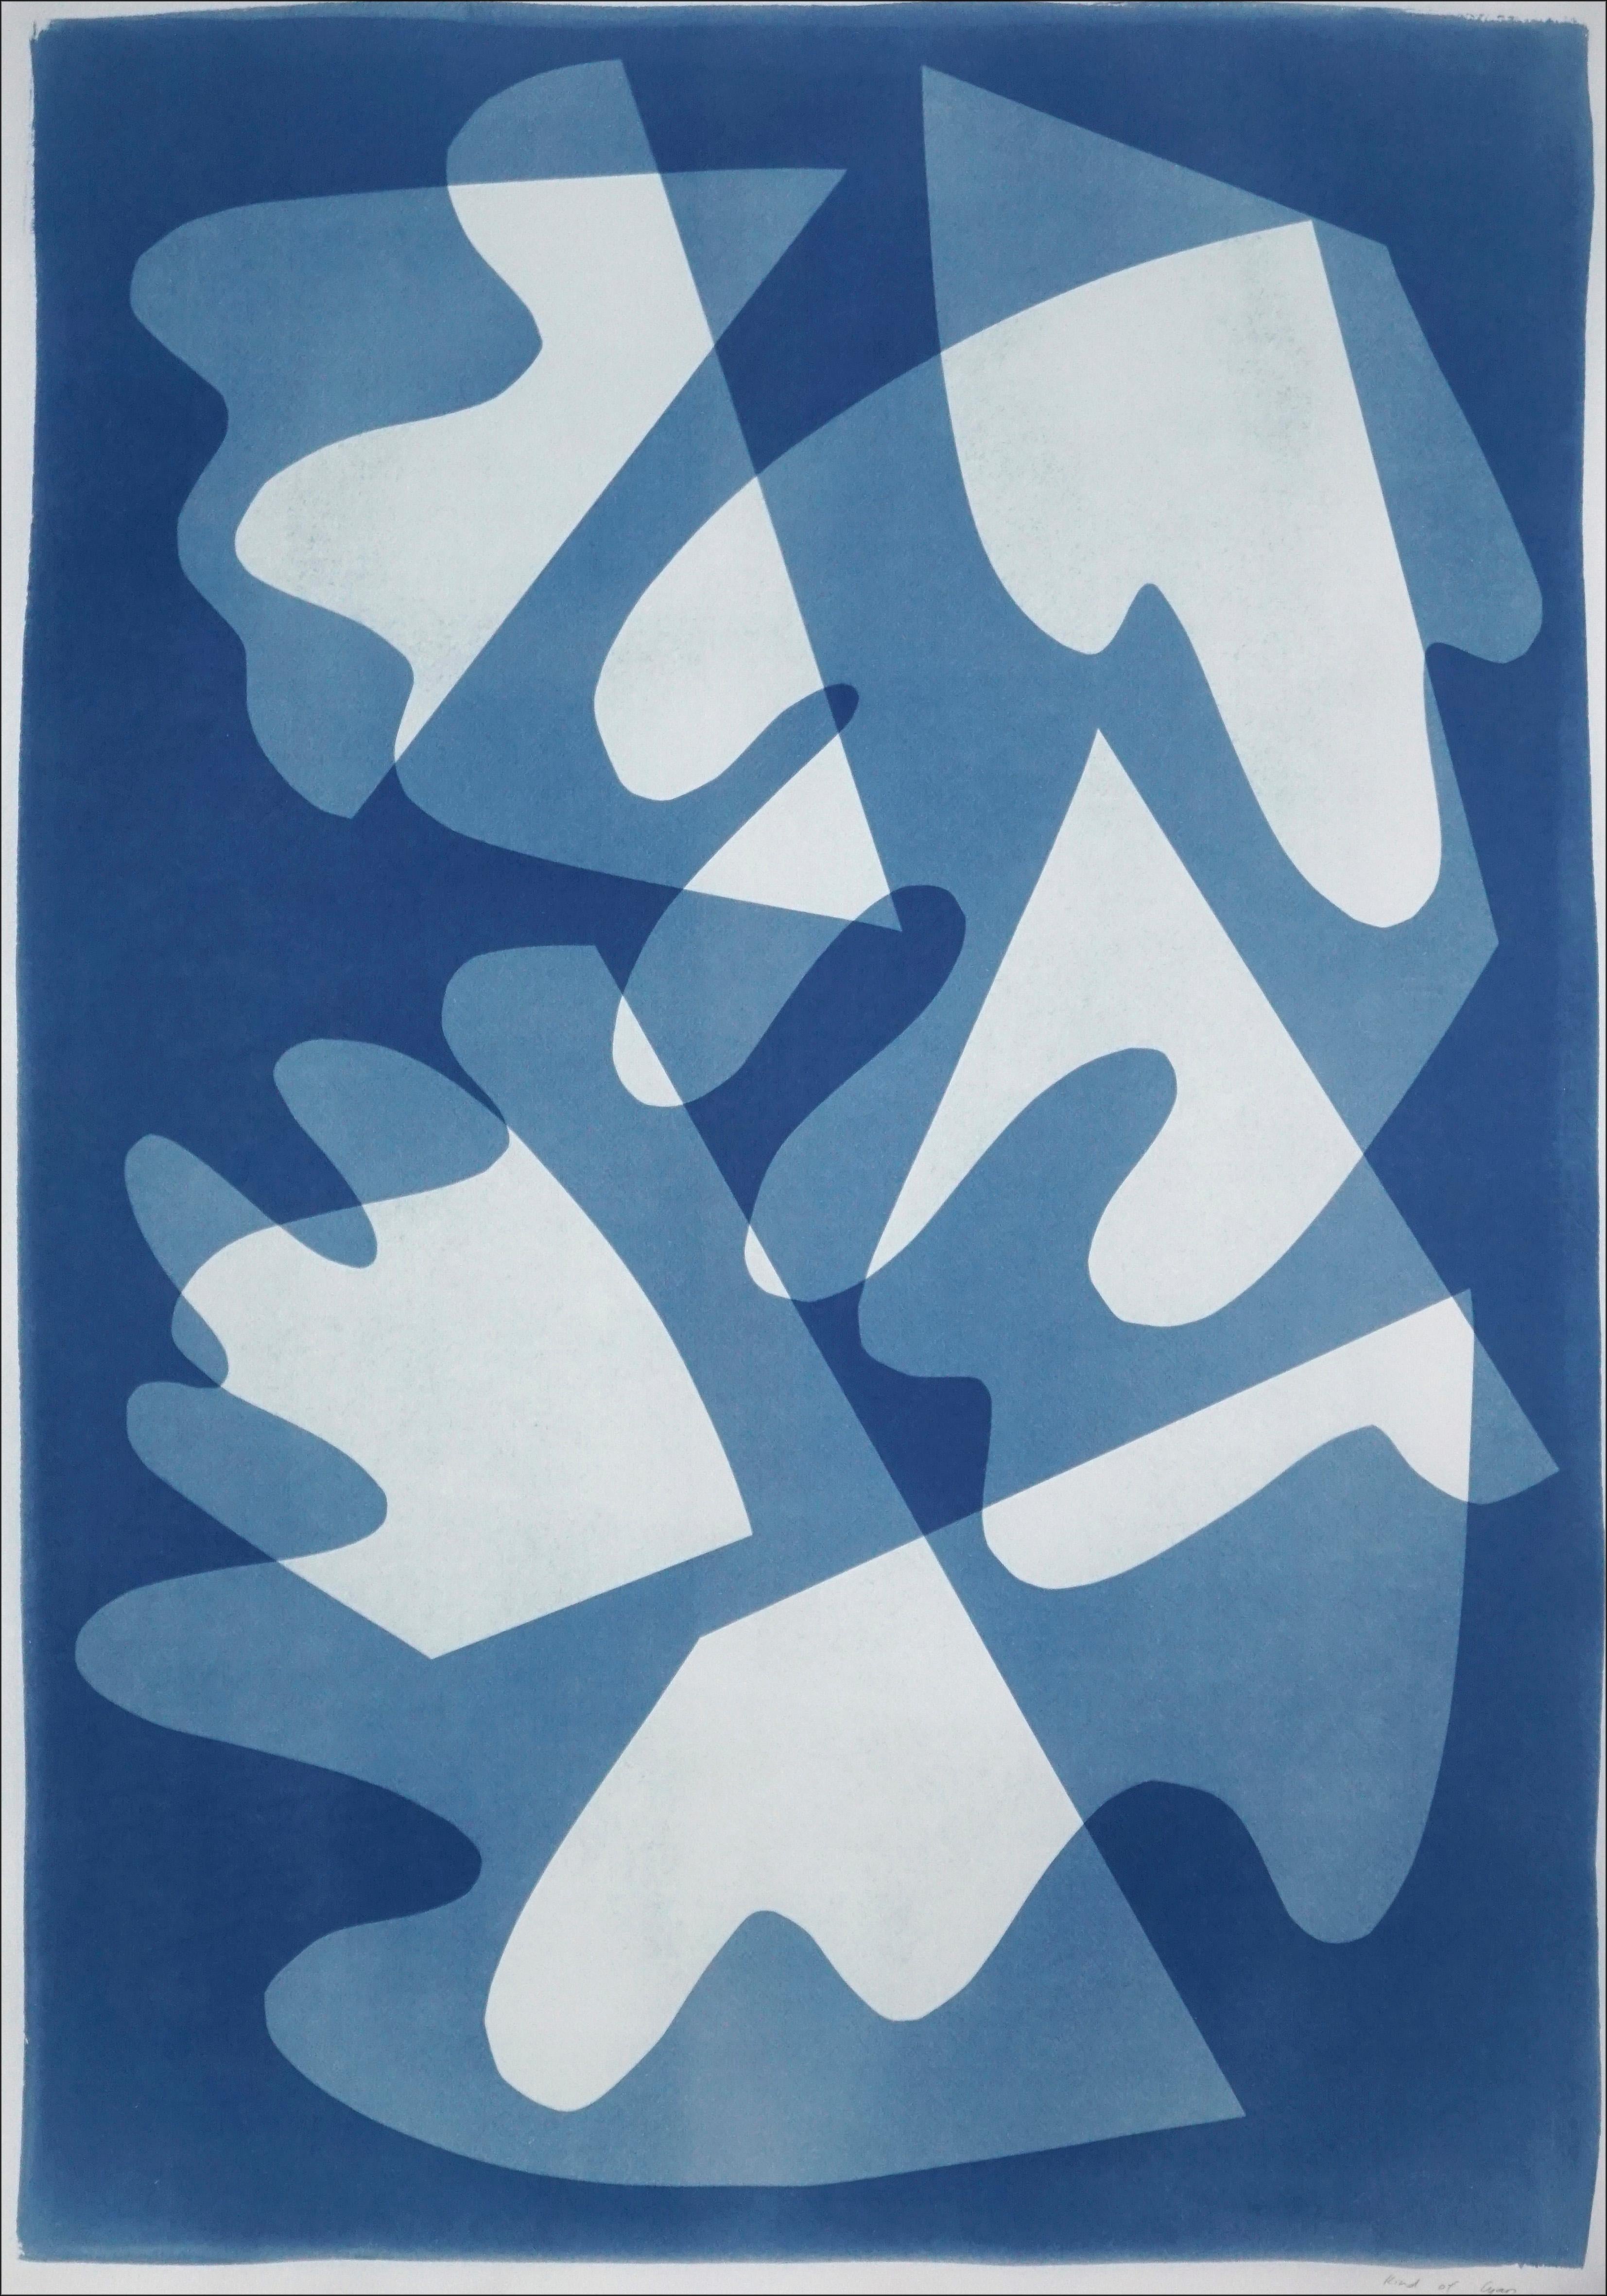 Walking on Glass, Unique Monotype, Cutouts Mid-century Shapes in Blue Tones 2021